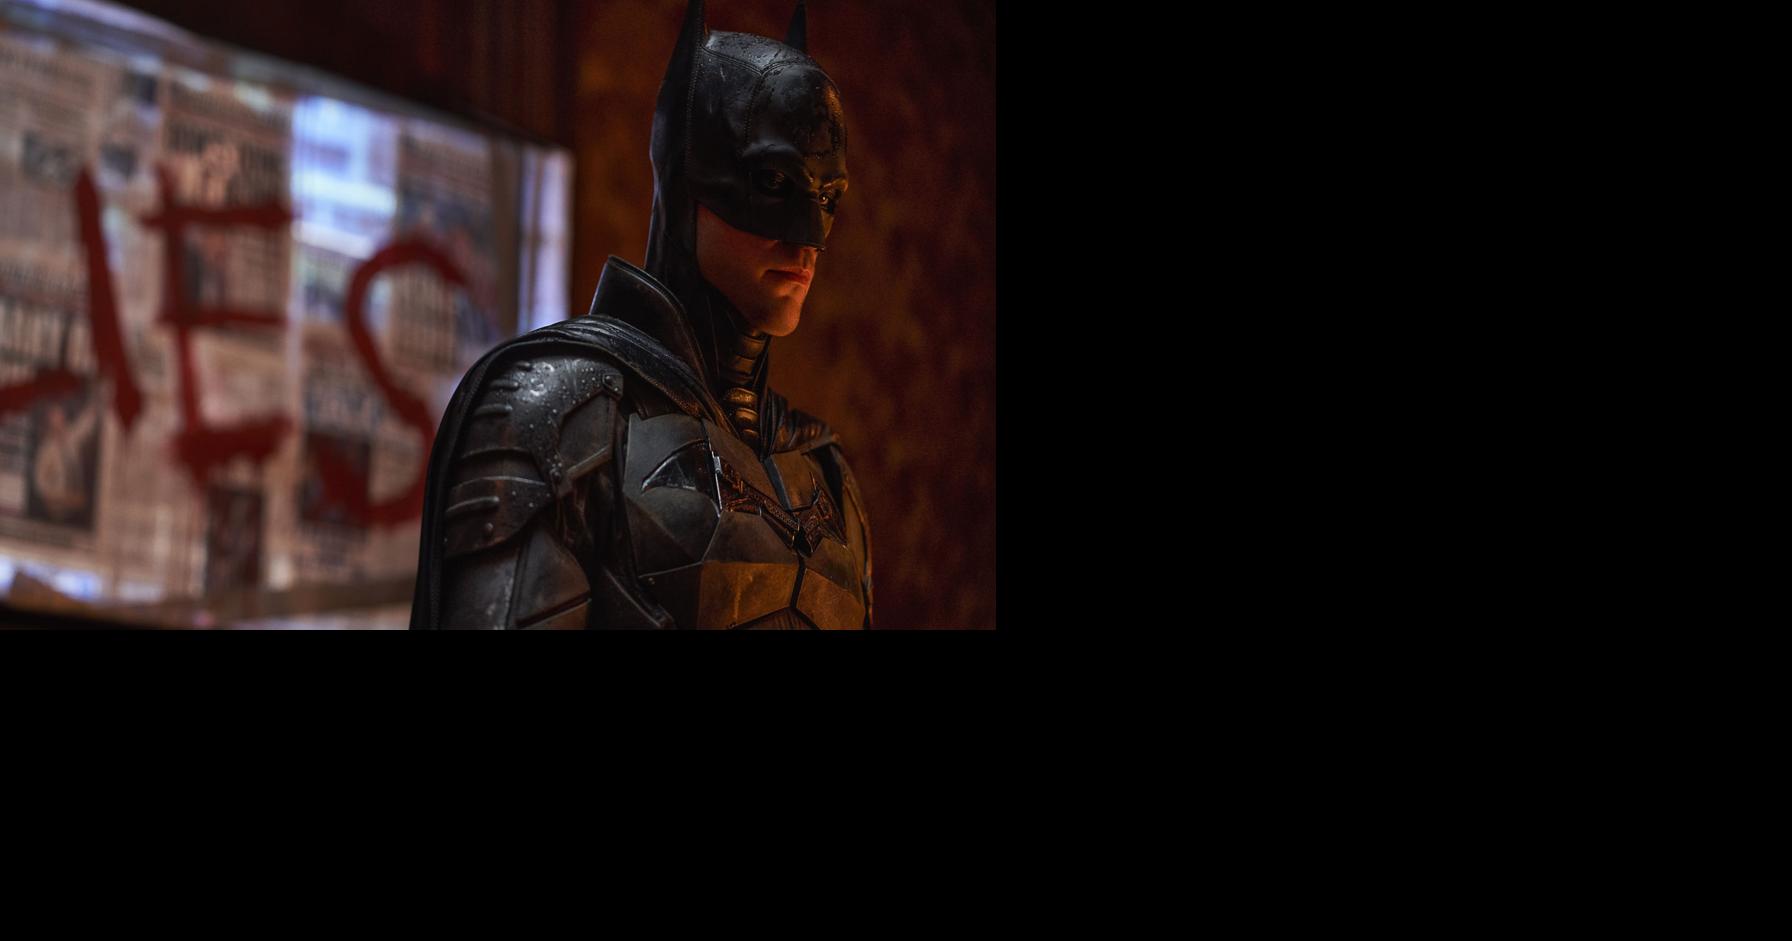 Pattinson's raw 'Batman' emerges from the darkness: 'An agent of vengeance'  | Arts and Culture 